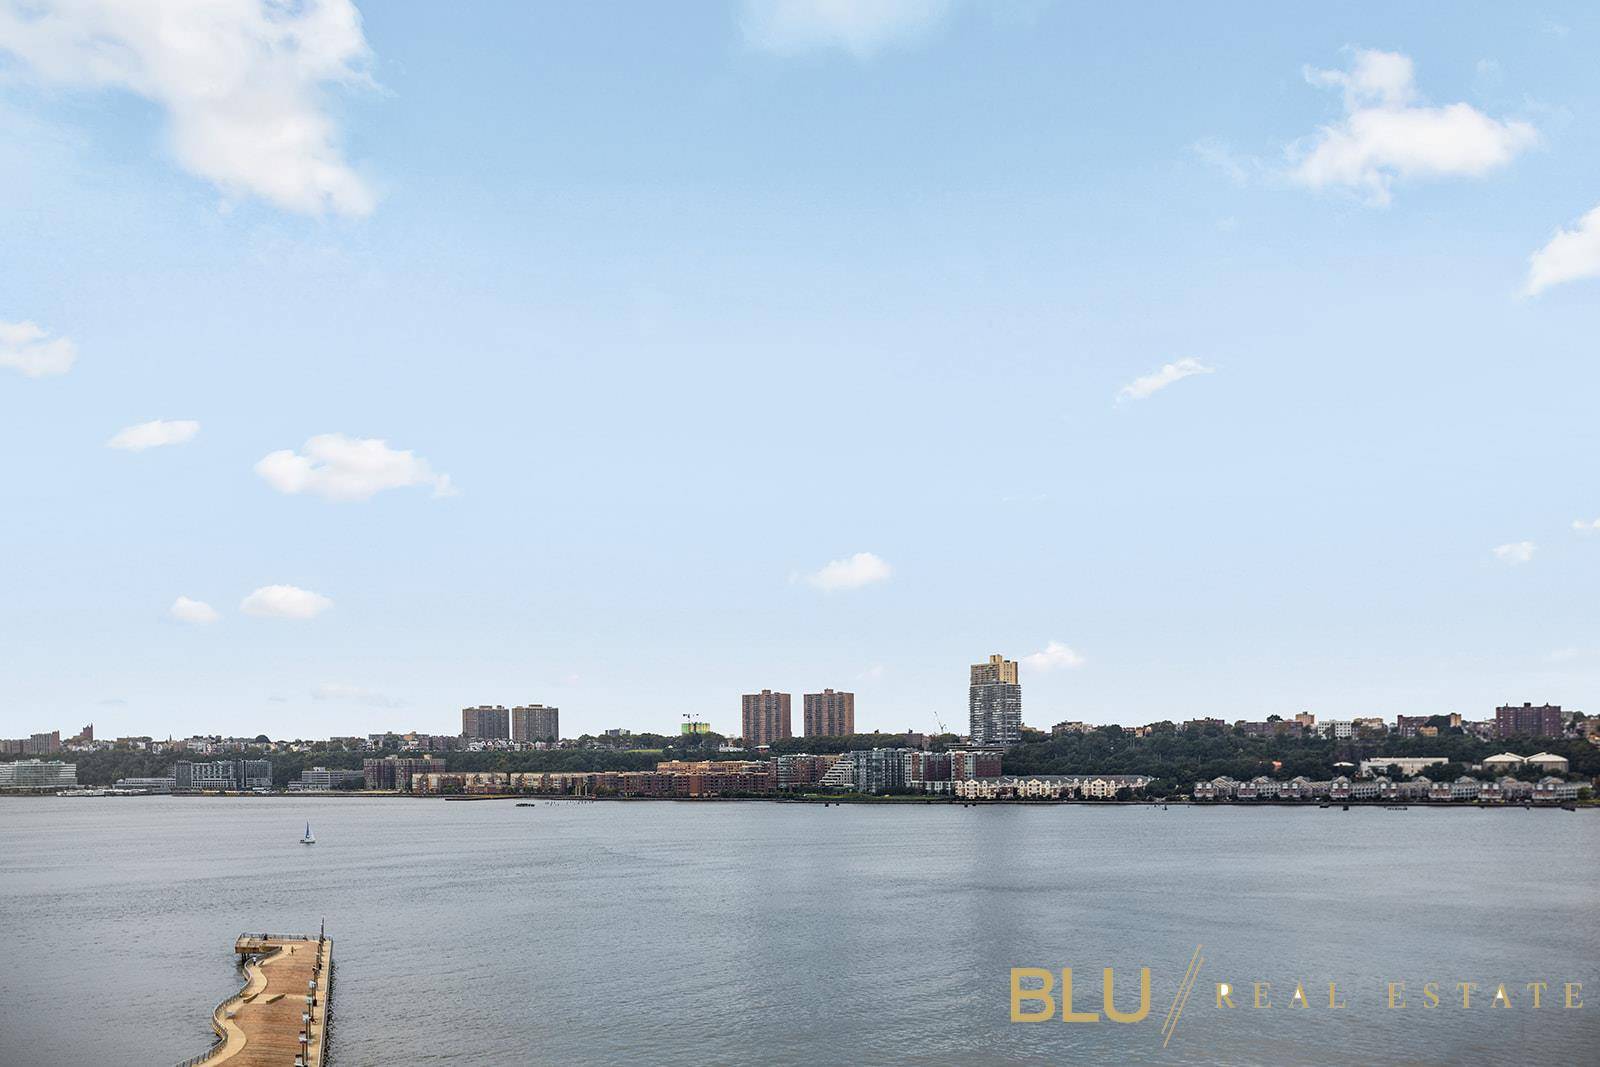 DESCRIPTIONWelcome to Apartment 15M at 220 Riverside Boulevard A 2 bedroom, 2 bathroom home where every room offers stunning views of the Hudson River.